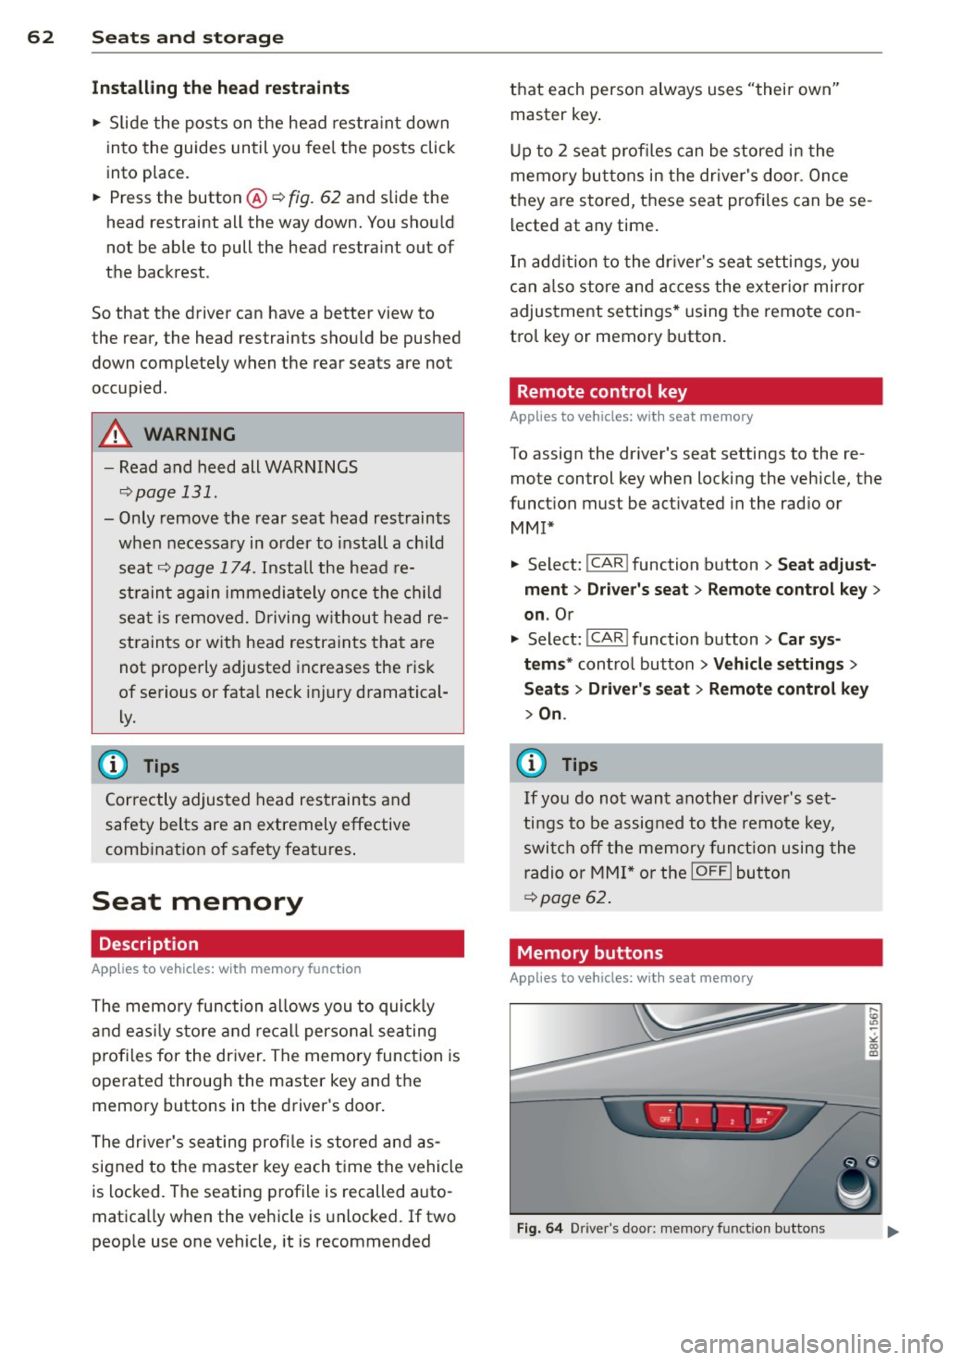 AUDI S4 2013  Owners Manual 62  Seats and  storage 
Installing  the  head  restraints 
.. Slide  the  posts  on  the  head  restra int  down 
into  the guides  until  you  feel the  posts  click 
into  place. 
..  Press  the  bu